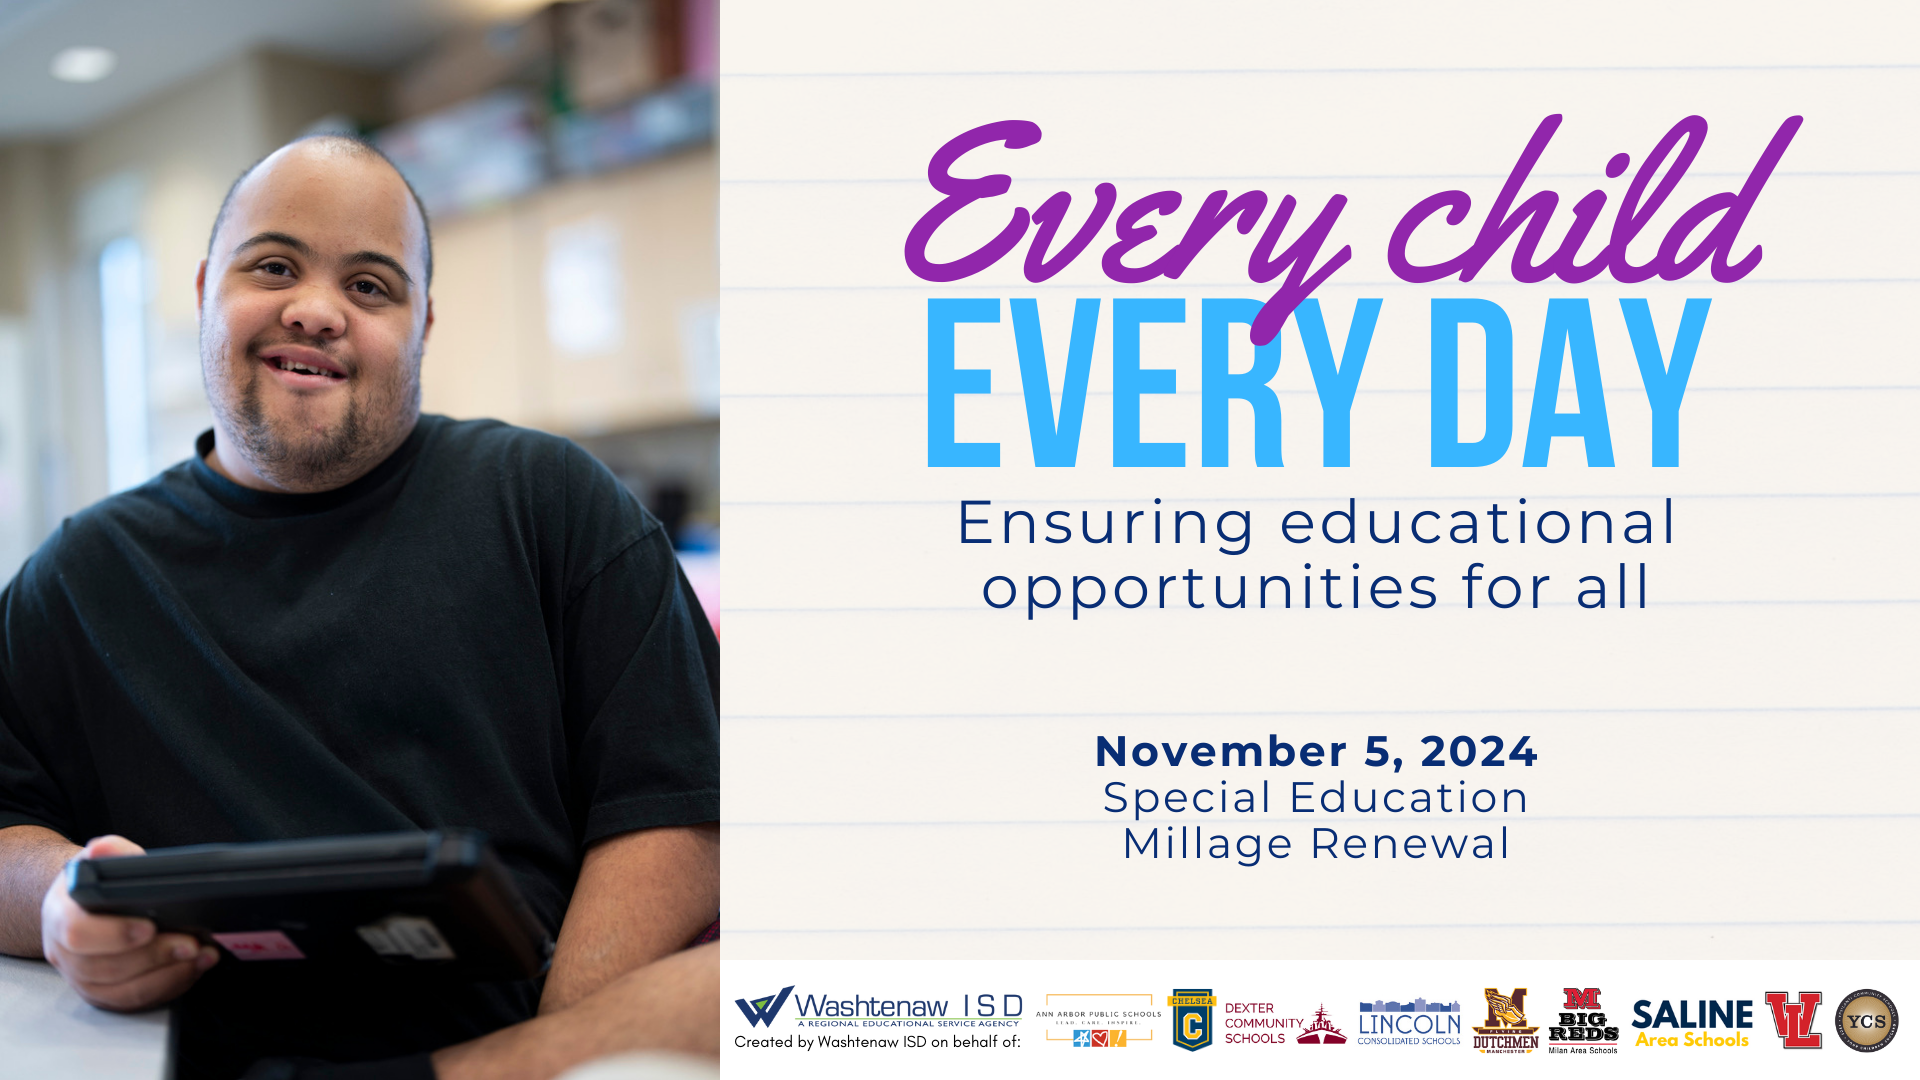 Every child. Every day. Ensuring educational opportunities for all. November 5, 2024, Special education millage renewal.